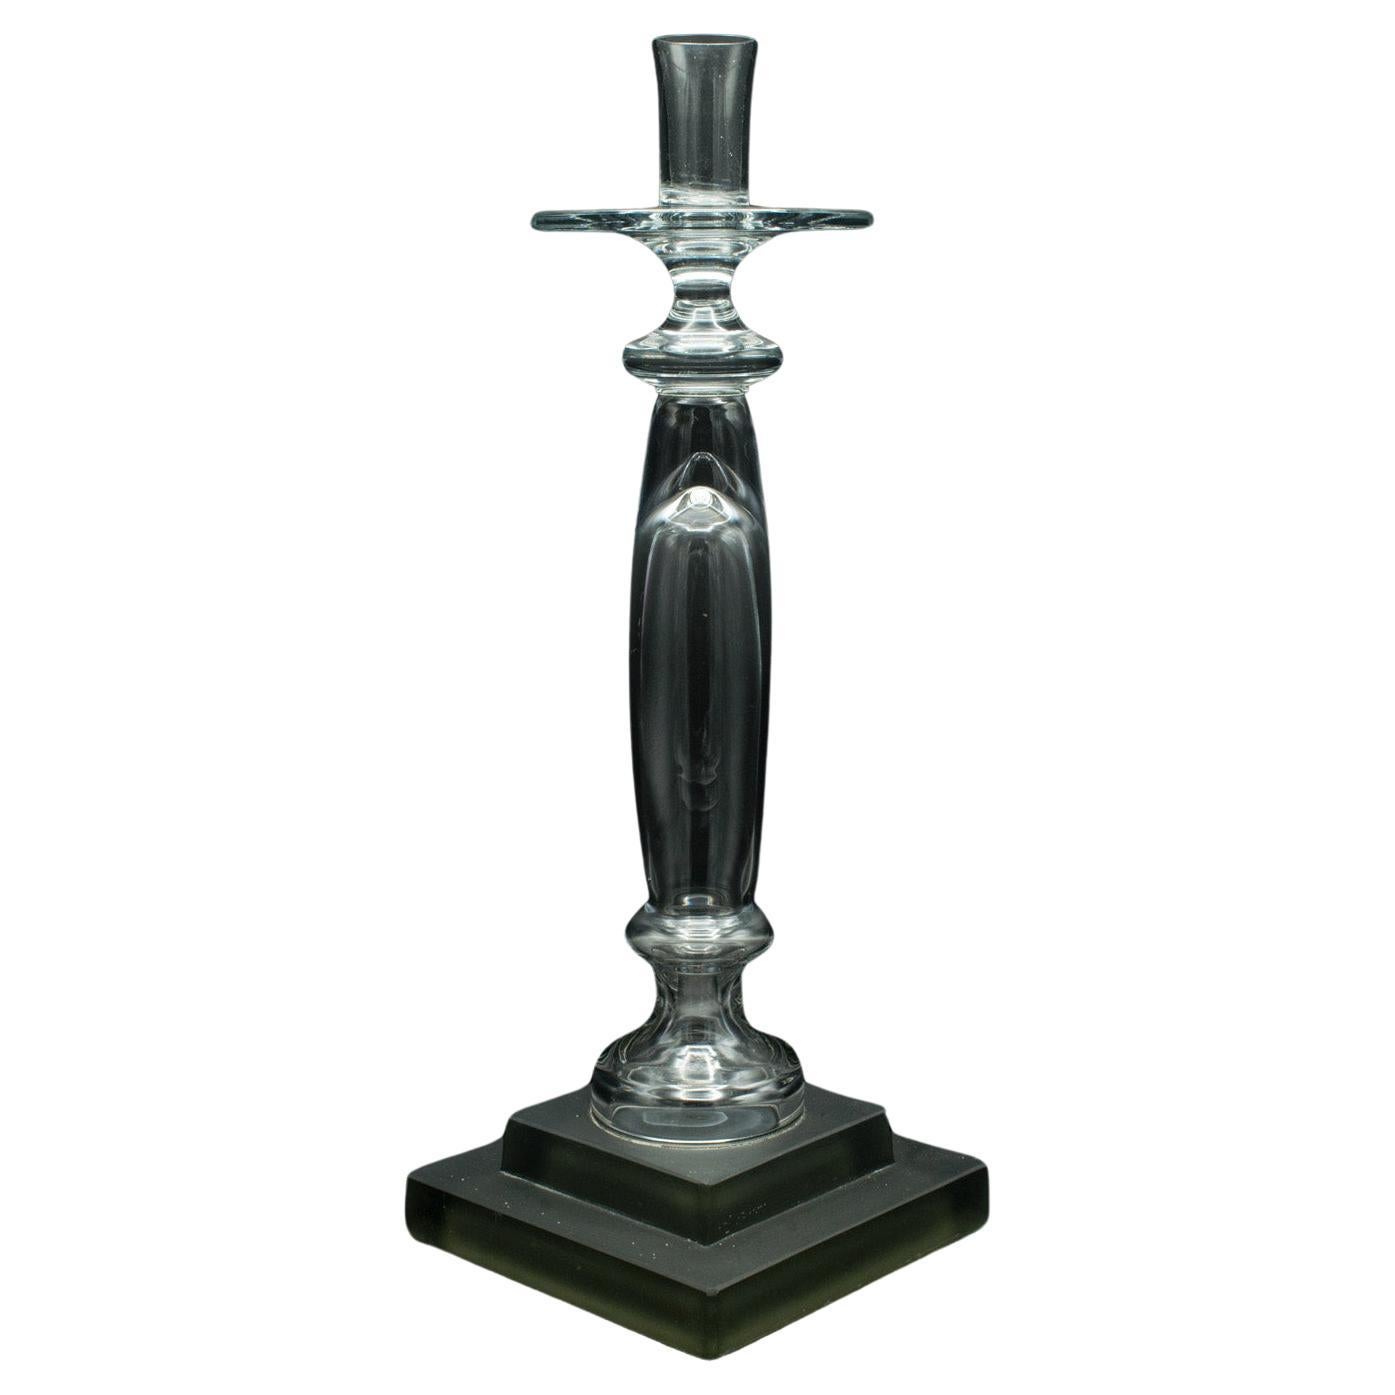 Vintage Centrepiece Candlestick, Italian Glass, Candle Nozzle, Late 20th Century For Sale